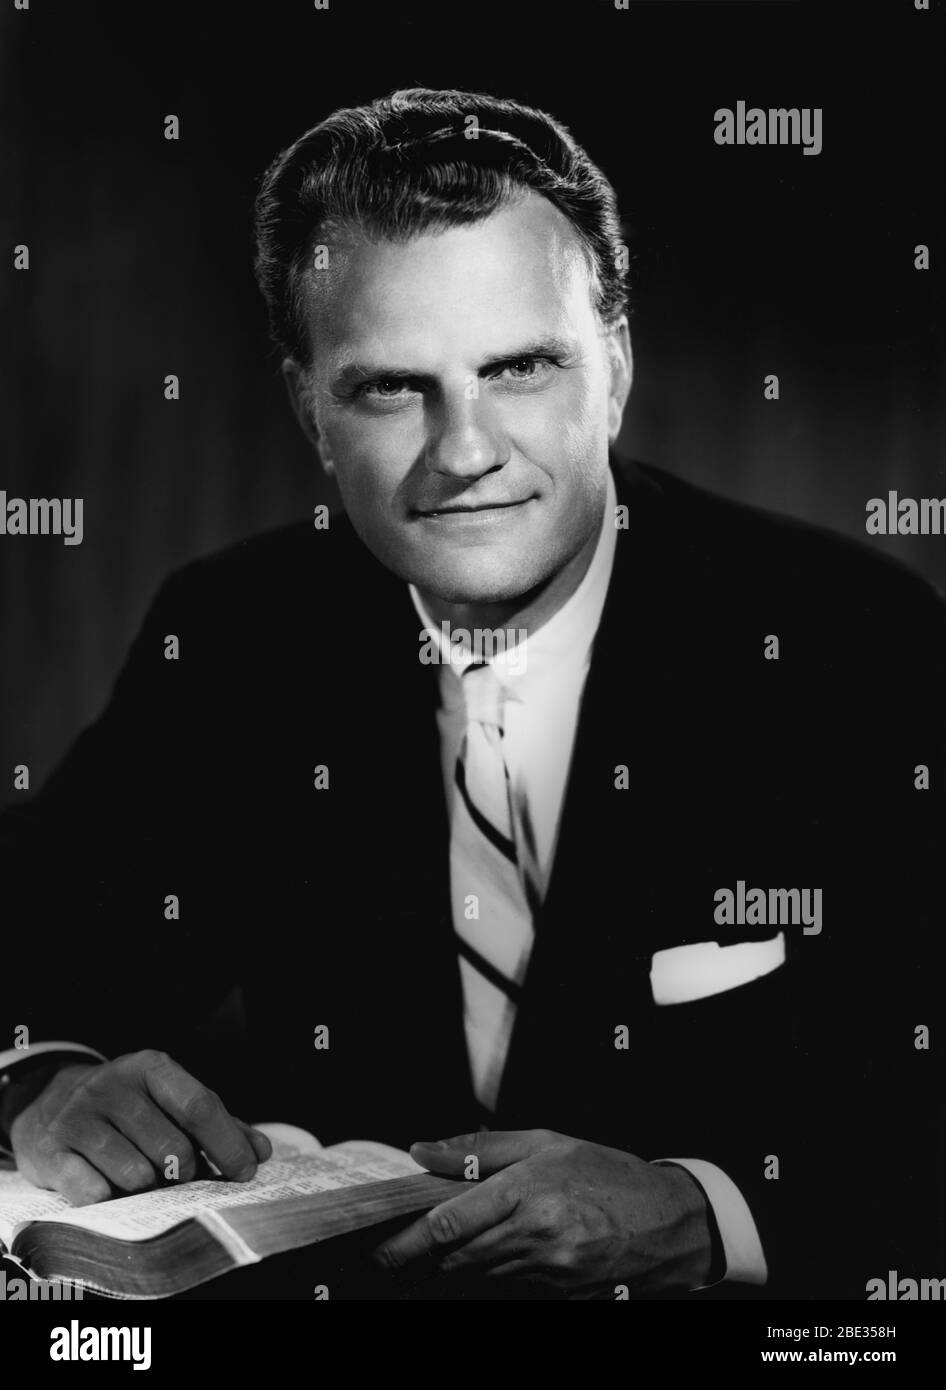 Oct. 2, 1960 - London, England, U.K. - BILLY GRAHAM, born William Franklin Graham, Jr., is an evangelical Christian reverend and evangelist. He gained fame due to his sermons being broadcast on the radio and television. Stock Photo